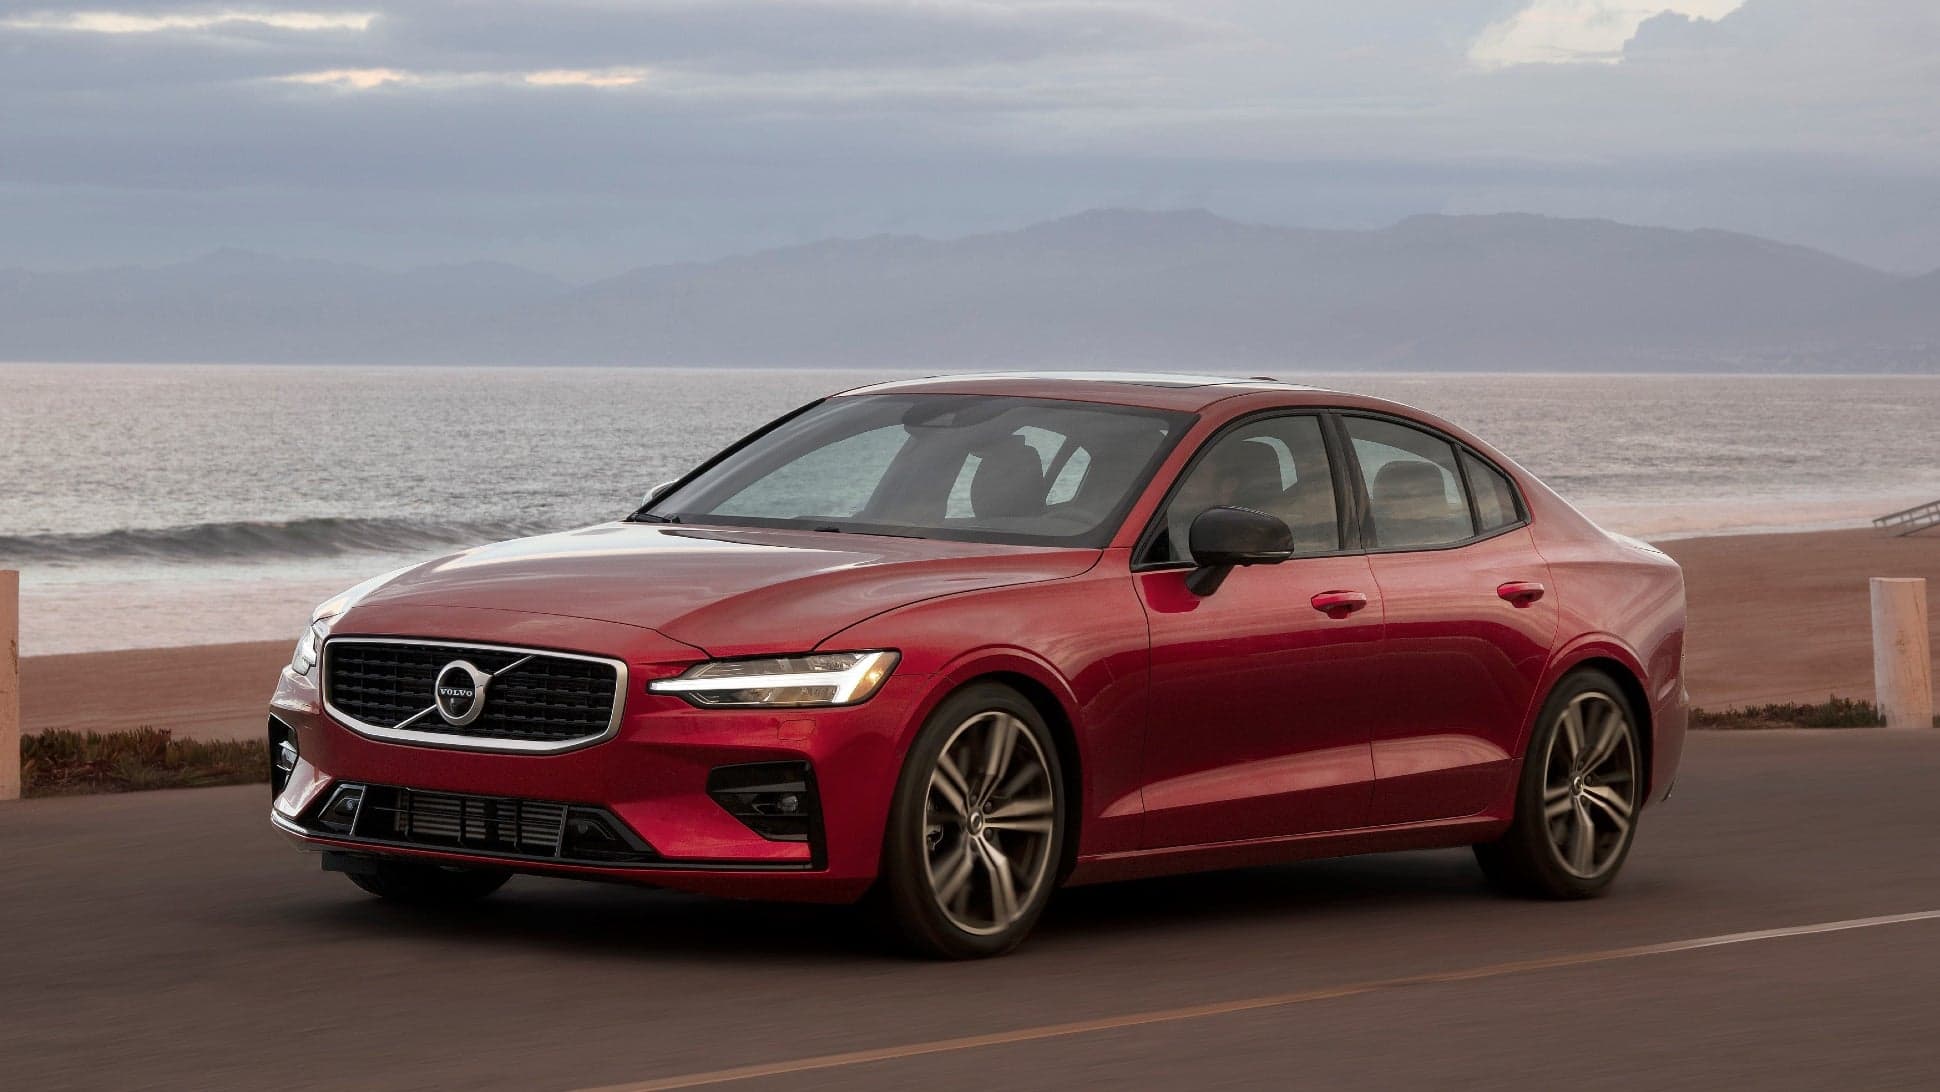 All New Volvo Cars Will be Limited to Just 112 MPH by Next Year